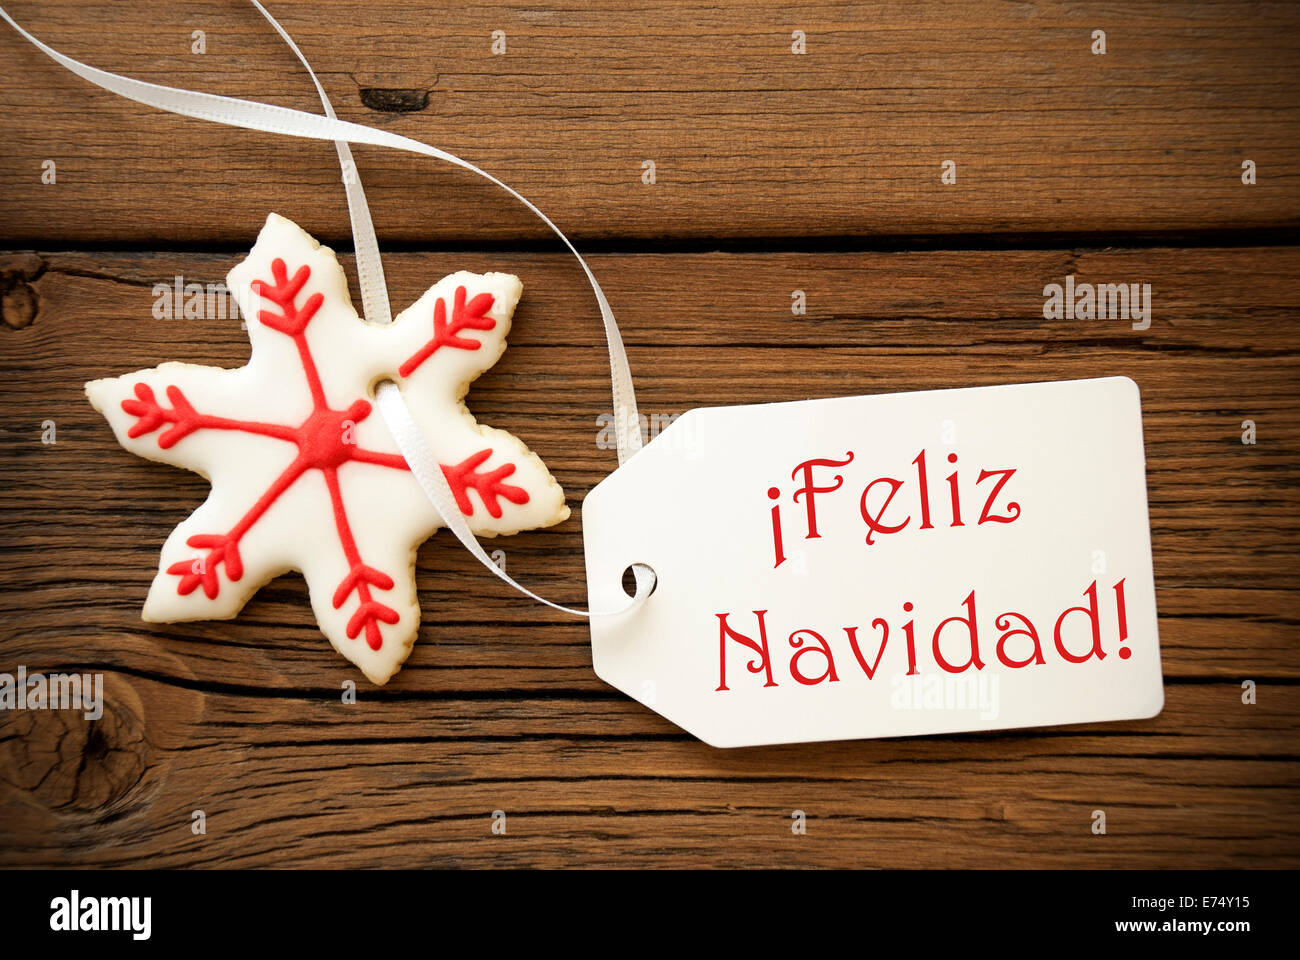 Feliz Navidad, which is Spanish and means Merry Christmas, on a Label with a red white Christmas Star Cookie Stock Photo